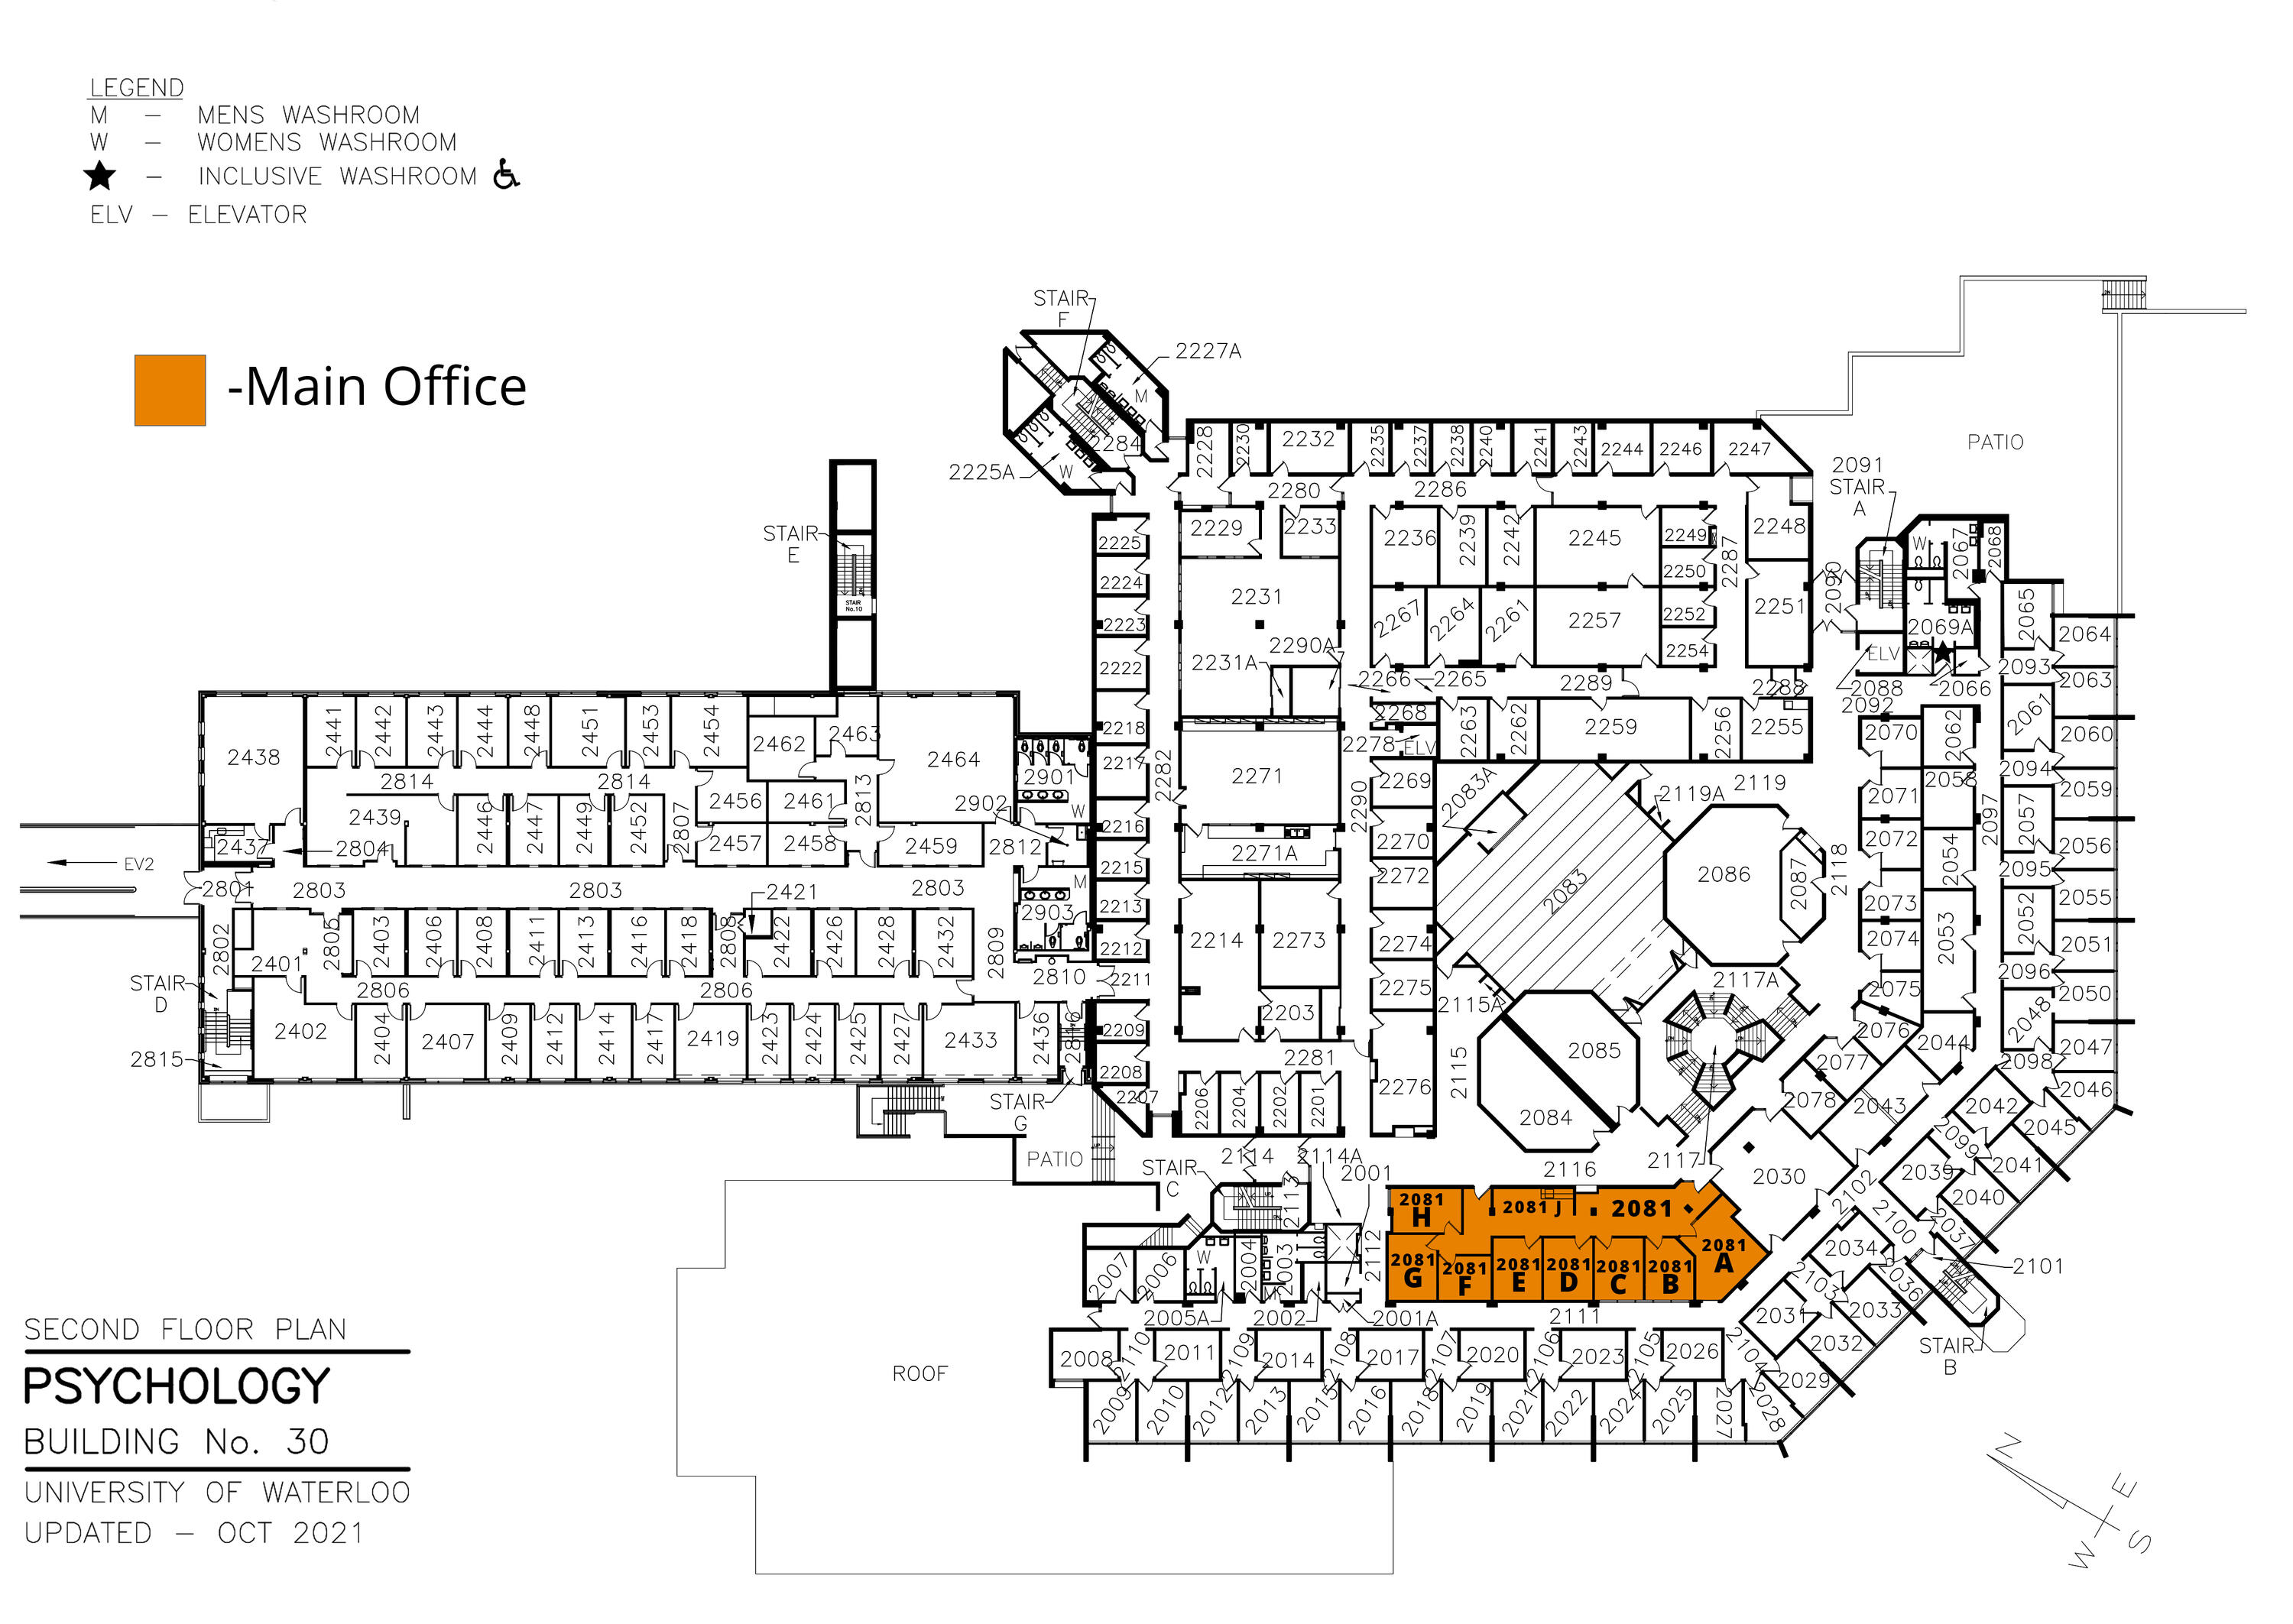 A map of the arts computing office's location in the second floor of PAS. The main office is in PAS-2081.